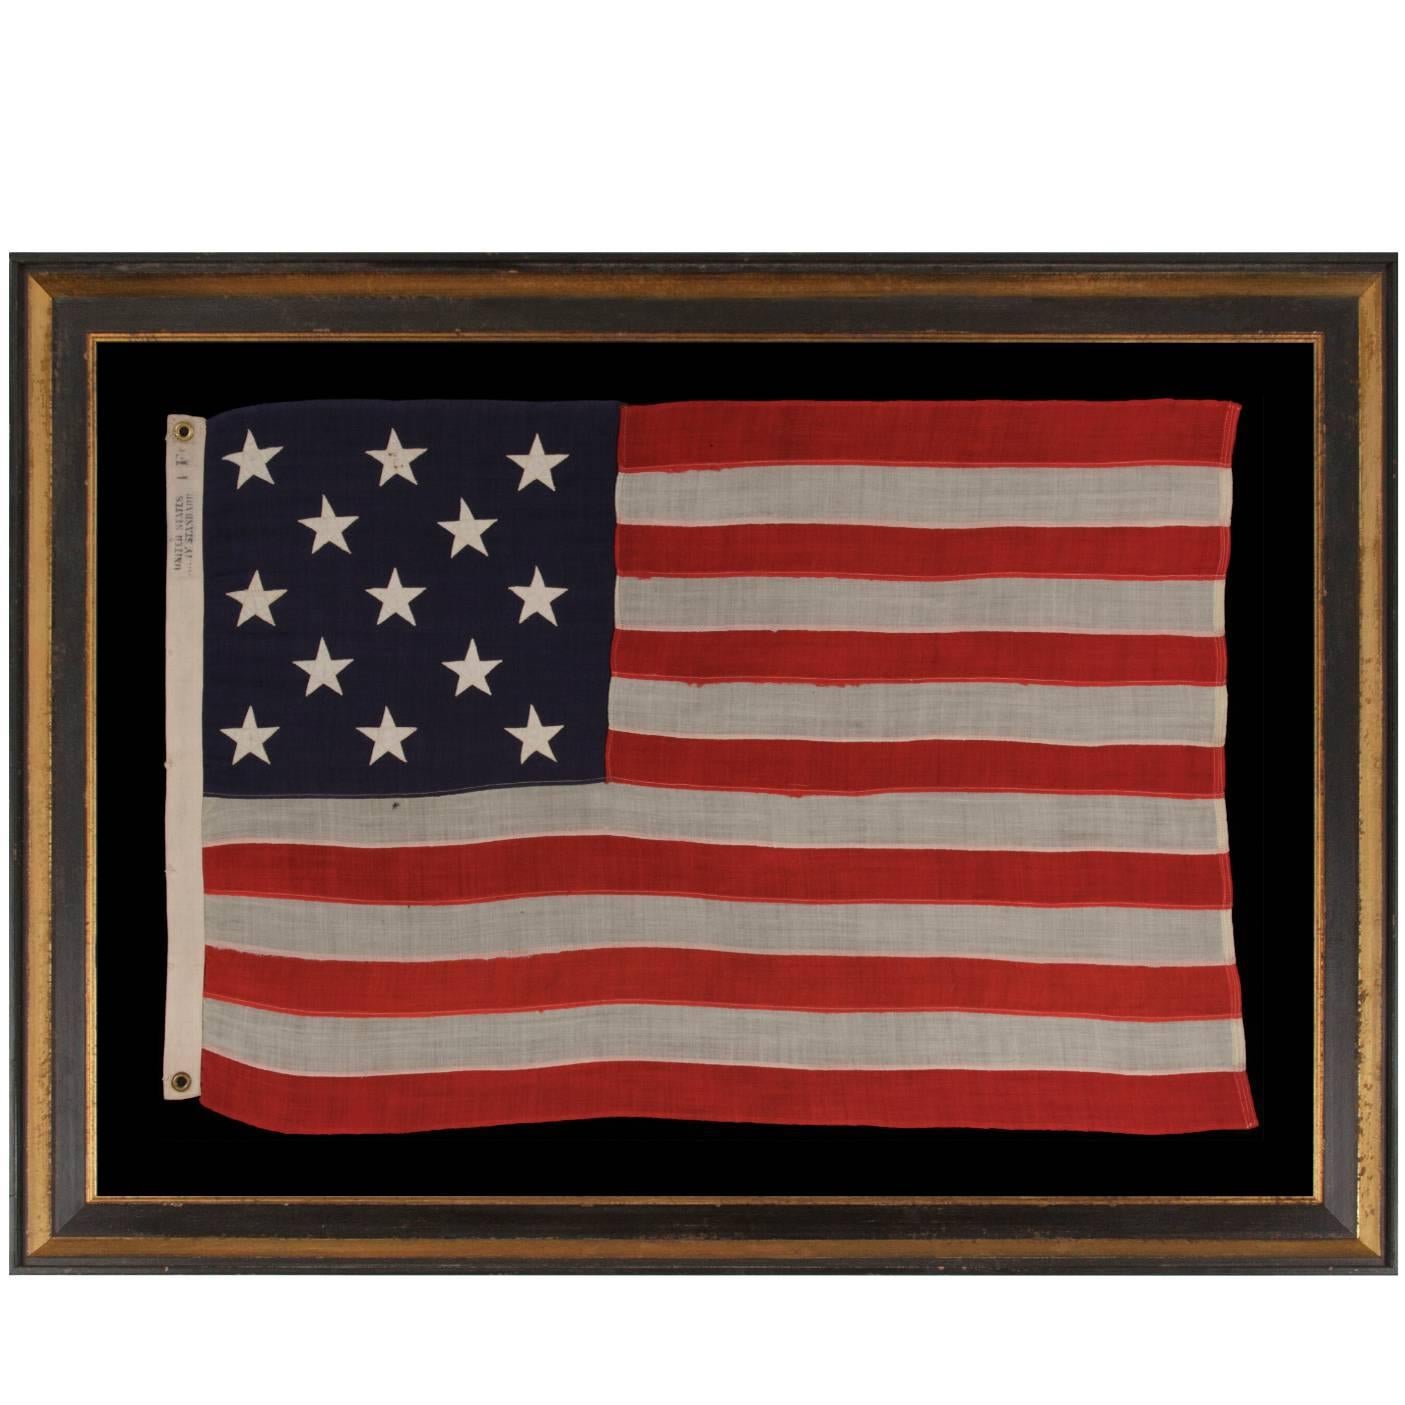 13 Stars Arranged in a 3-2-3-2-3 Pattern on a Small-Scale Antique American Flag